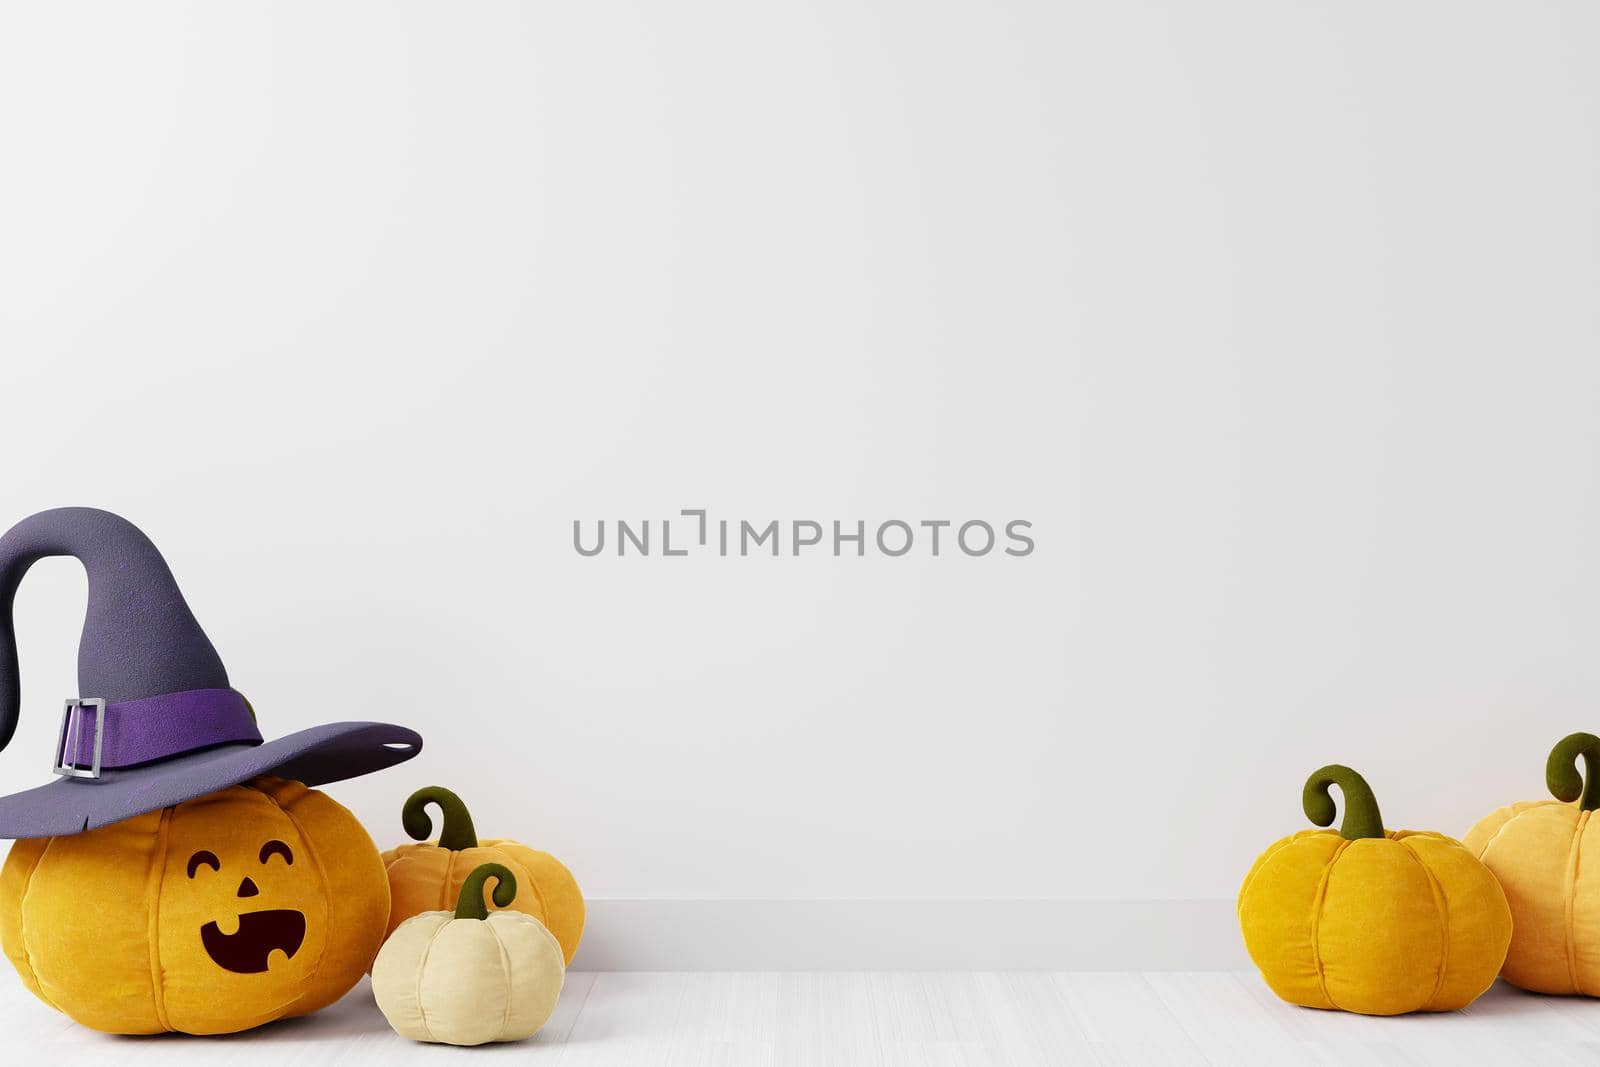 Halloween copyspace background with smiling pumpkins wearing hat on white background, smiling pumpkin face wearing hat, 3D rendering, Halloween theme with pumpkins on white background 3D illustration.